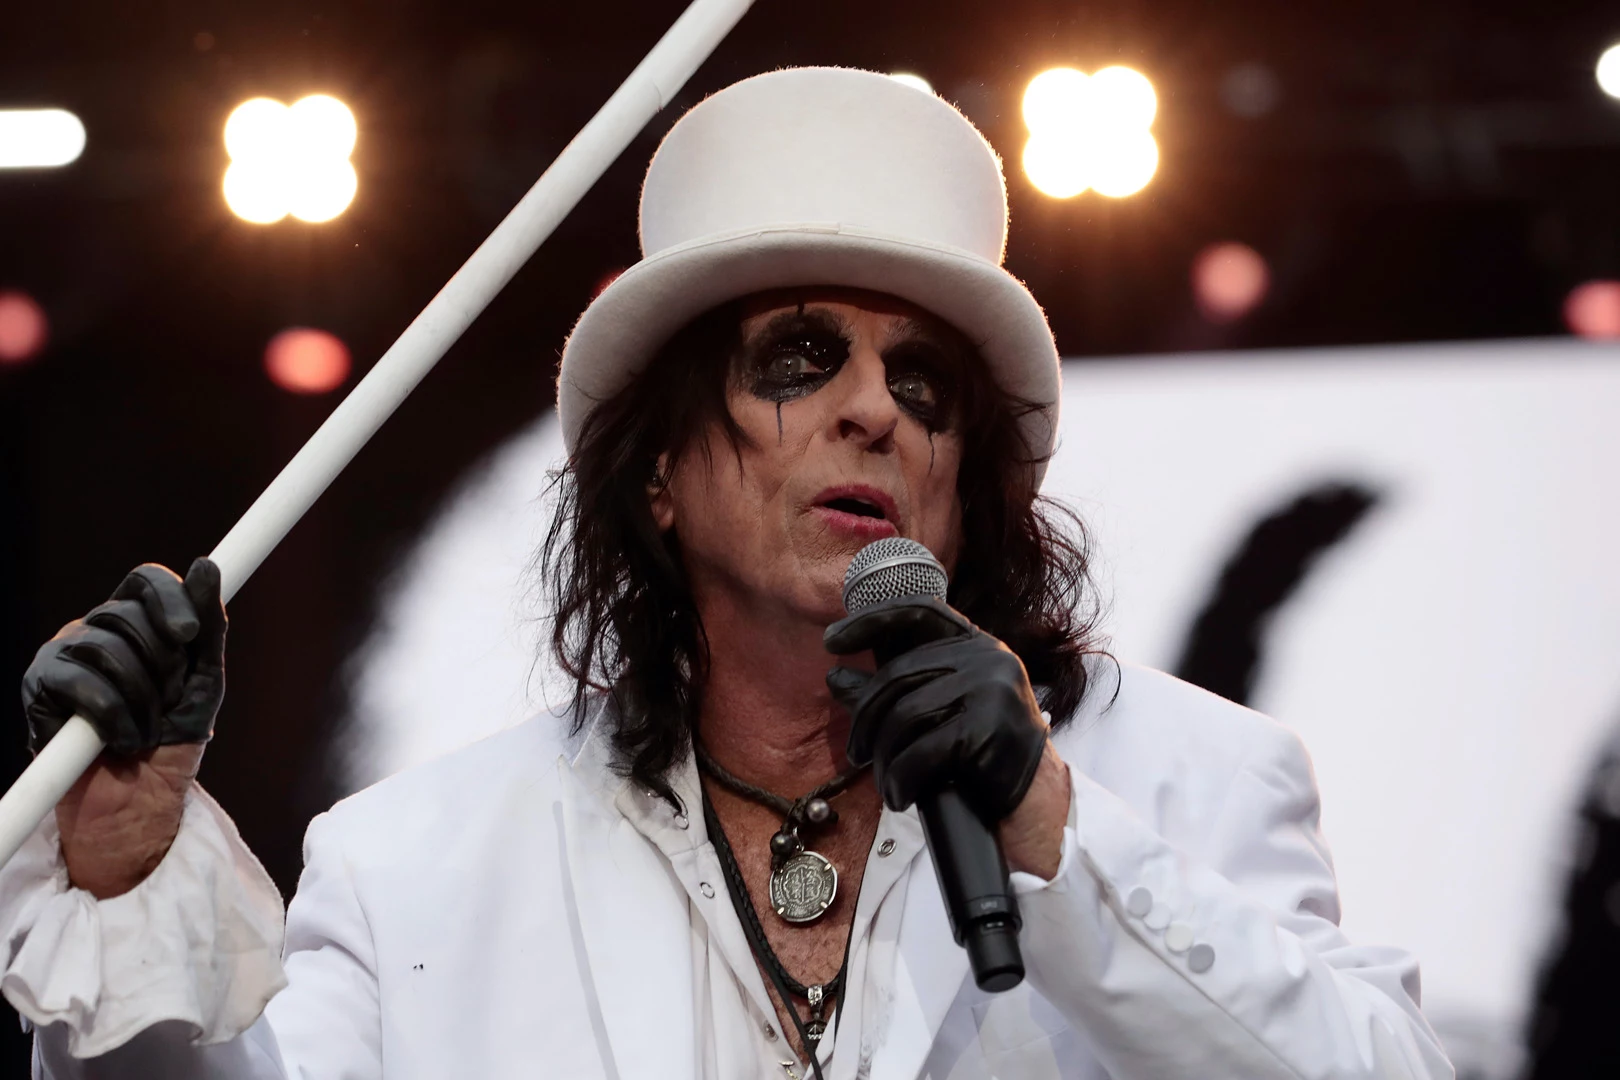 Twitter Loves This Photo of Alice Cooper Serving Food to Children